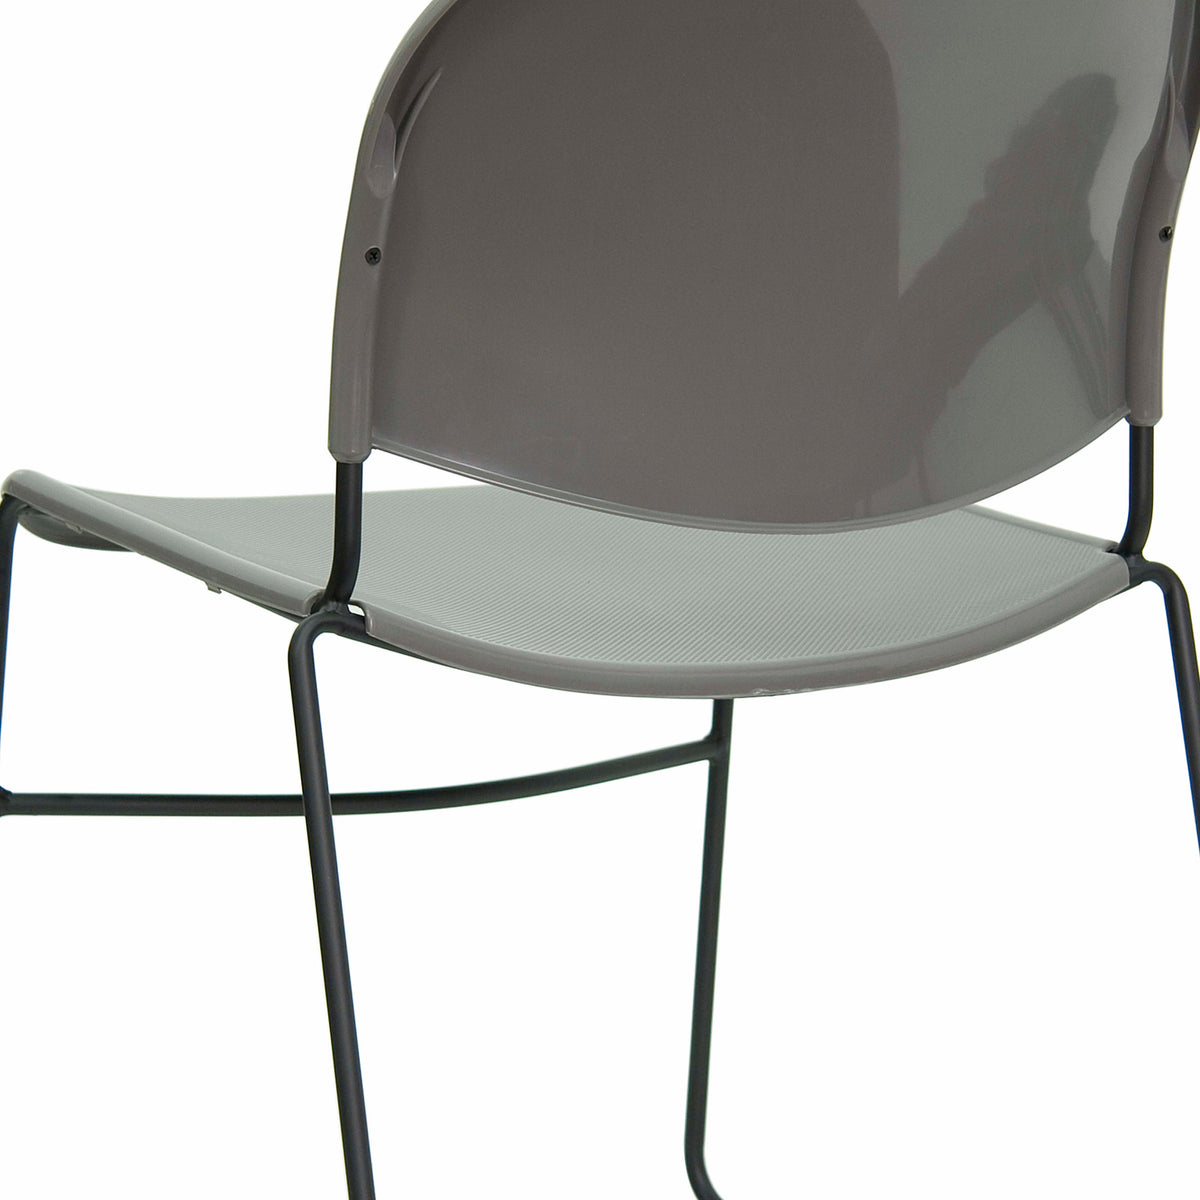 Gray Plastic/Black Frame |#| 880 lb. Capacity Gray Ultra-Compact Stack Chair with Black Frame